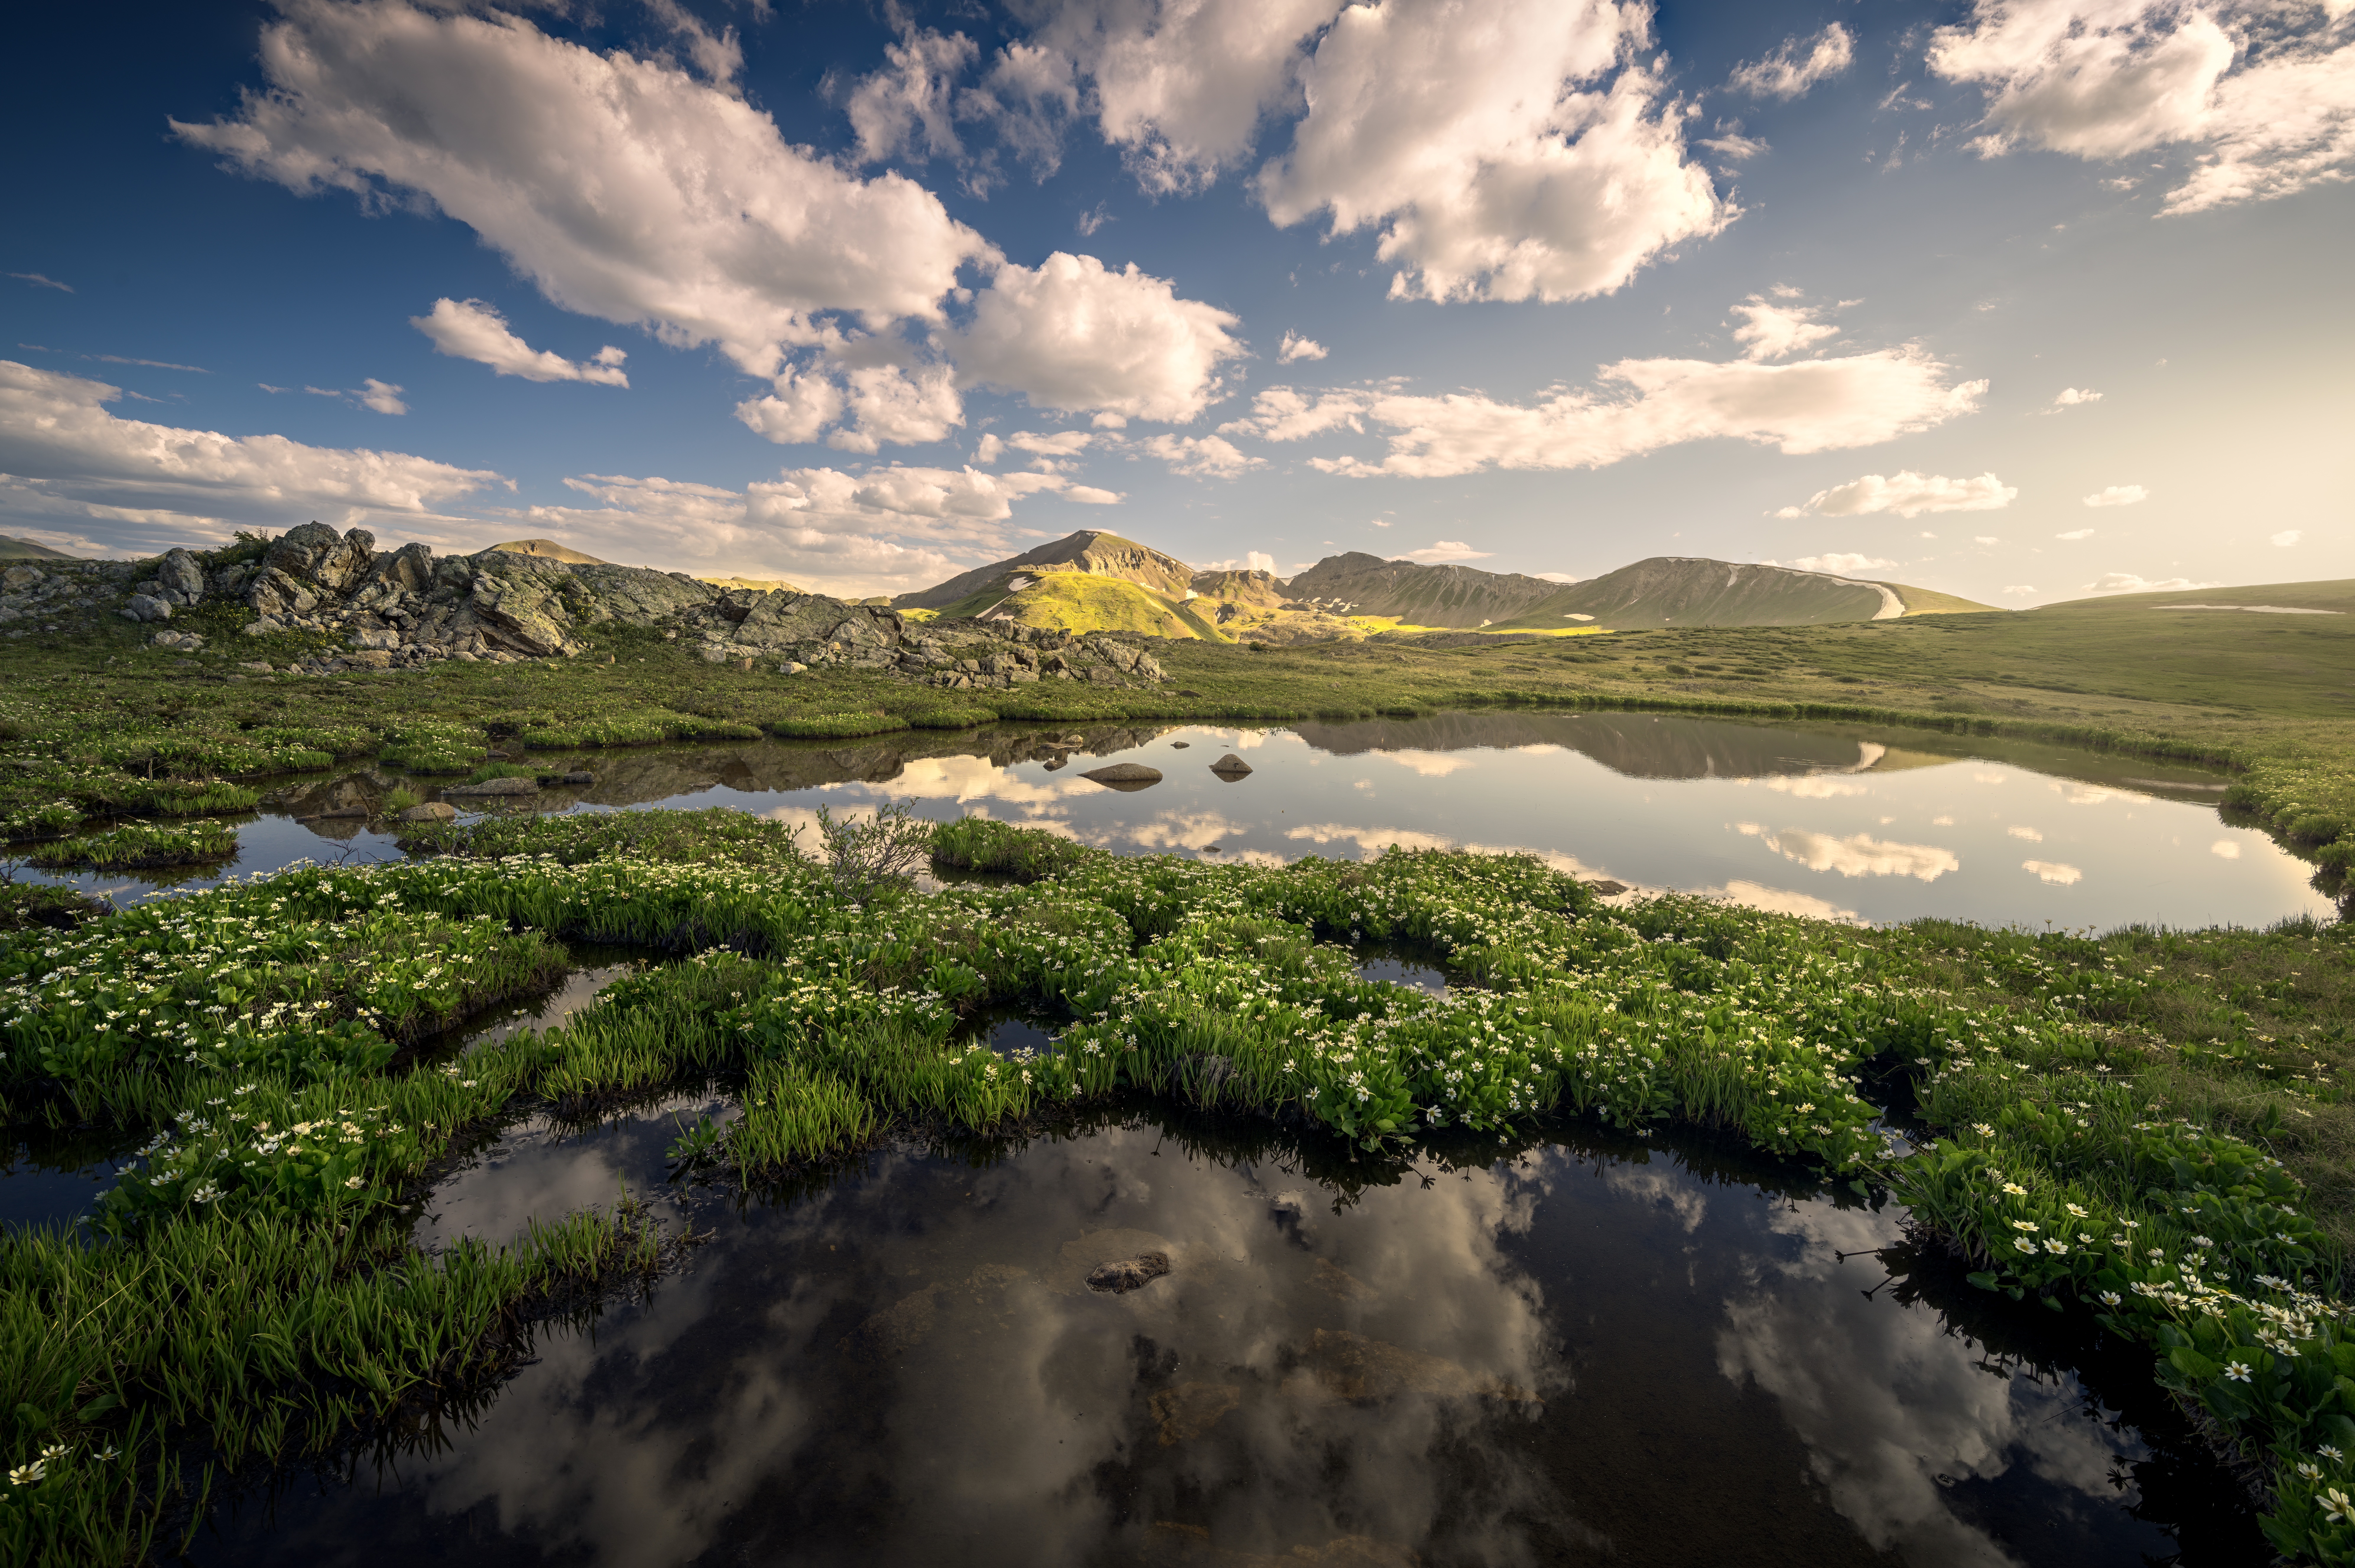 General 7970x5308 Colorado lake reflection mountains landscape flowers clouds sky water sunset sunset glow nature